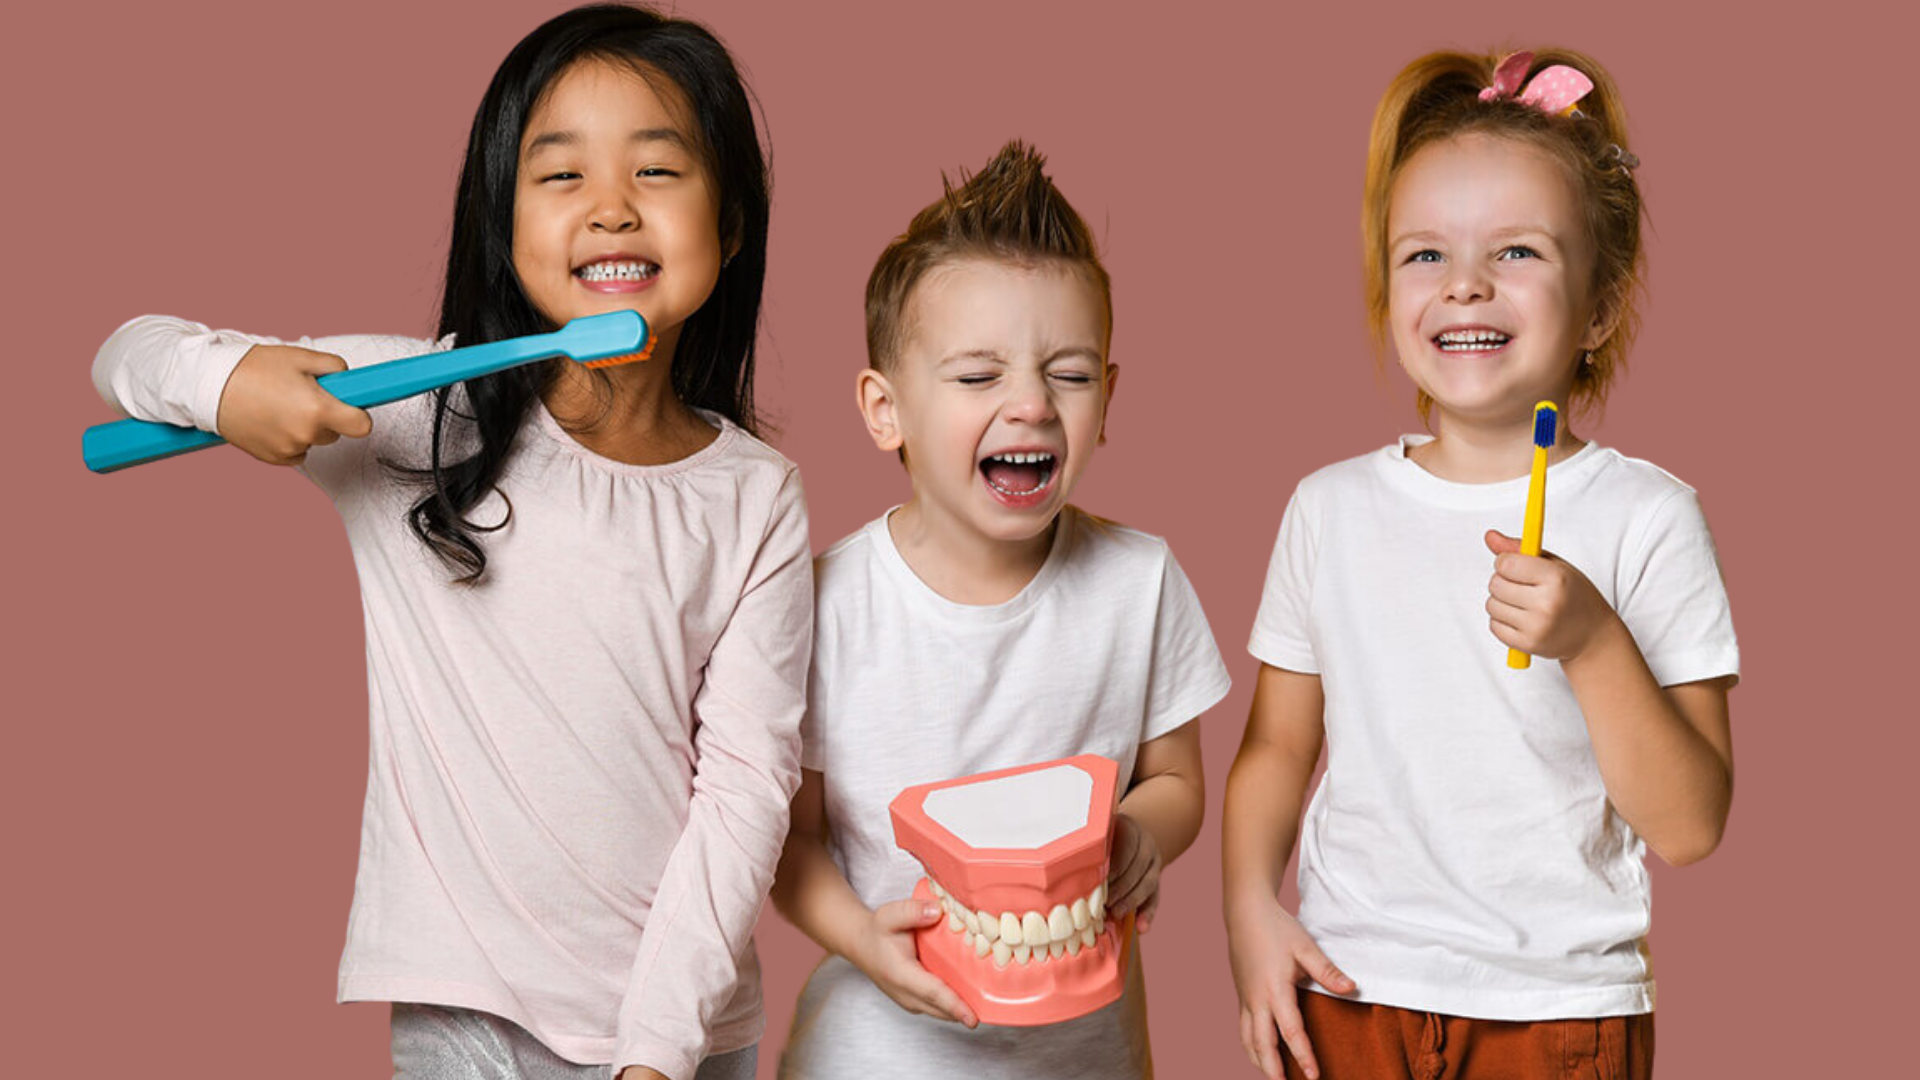 The ABCs of Pediatric Dentistry: Ensuring Your Child's Dental Health in Woolloongabba